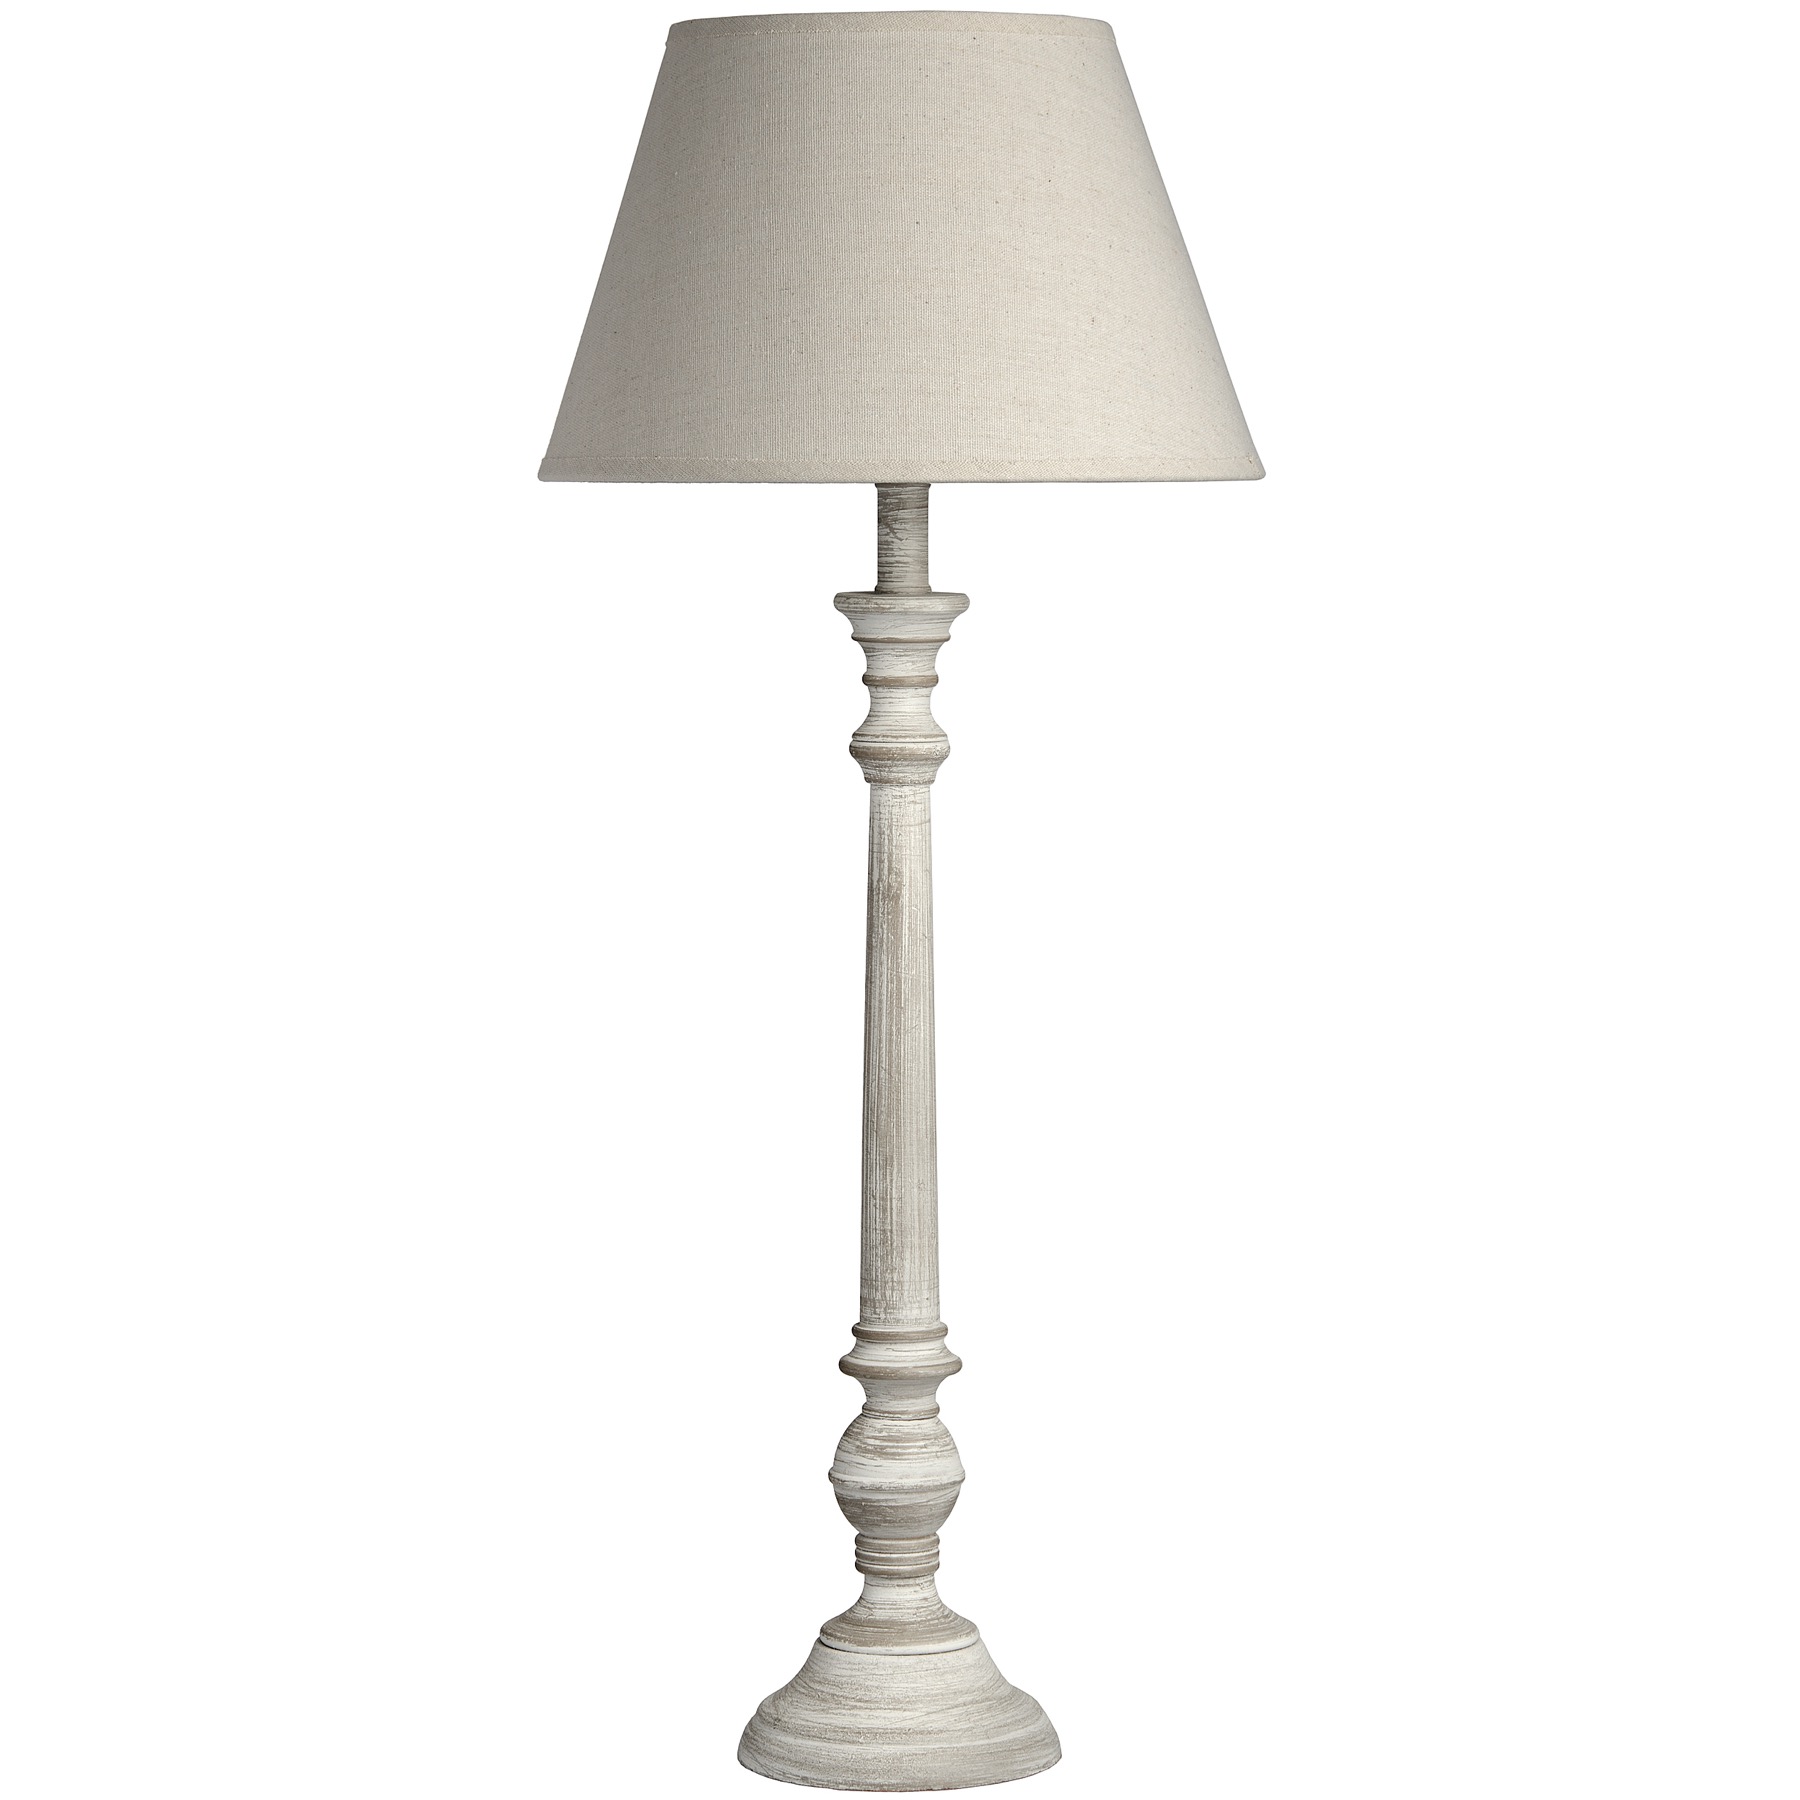 Leptis Magna Table Lamp - Image 1